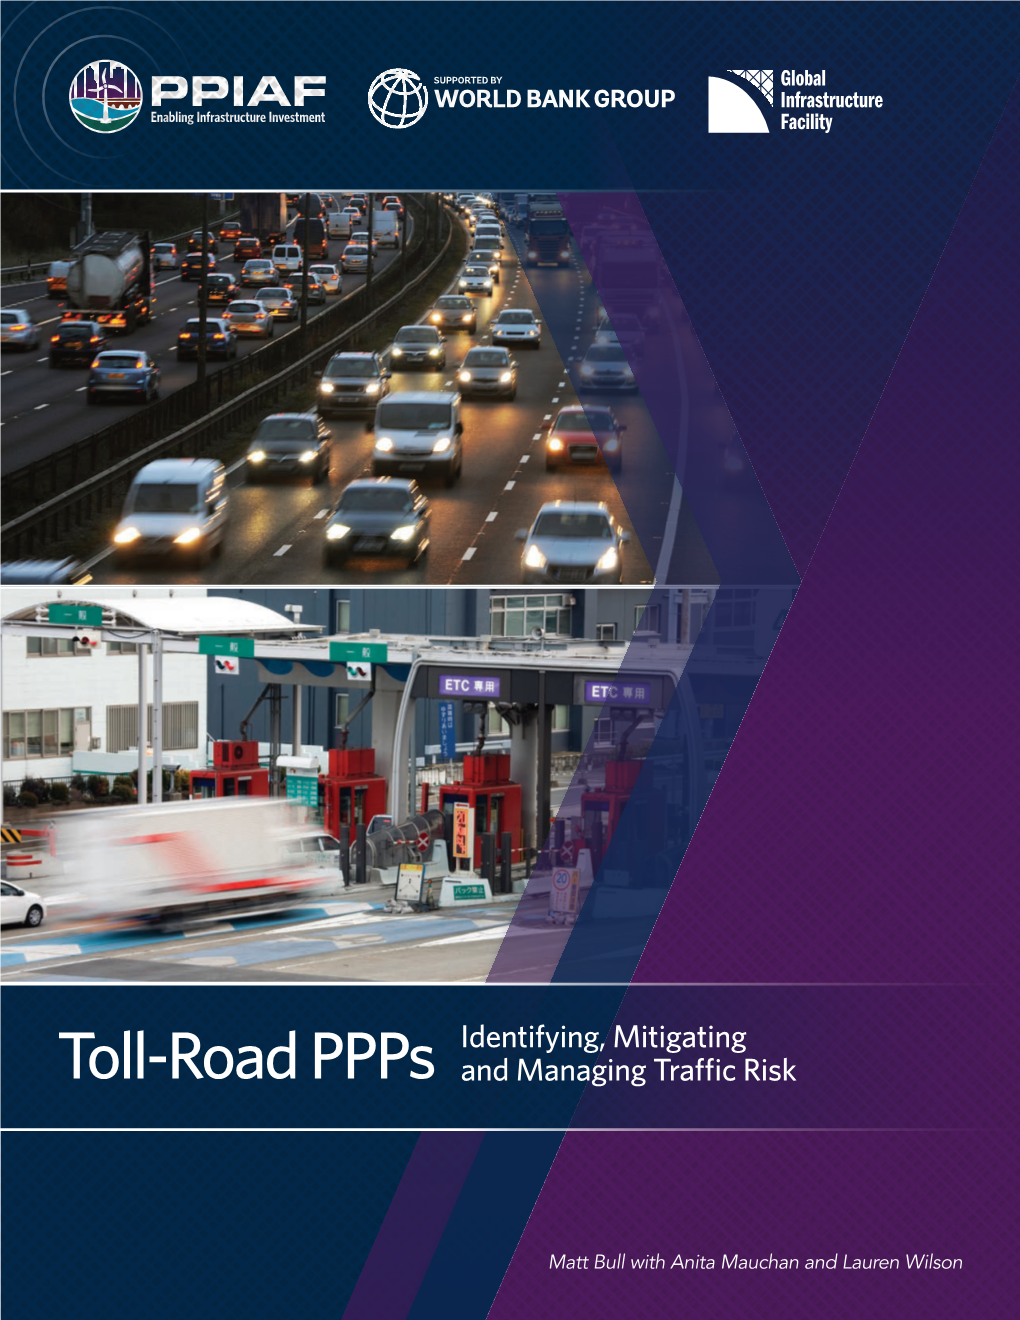 Toll-Road Ppps and Managing Traffic Risk